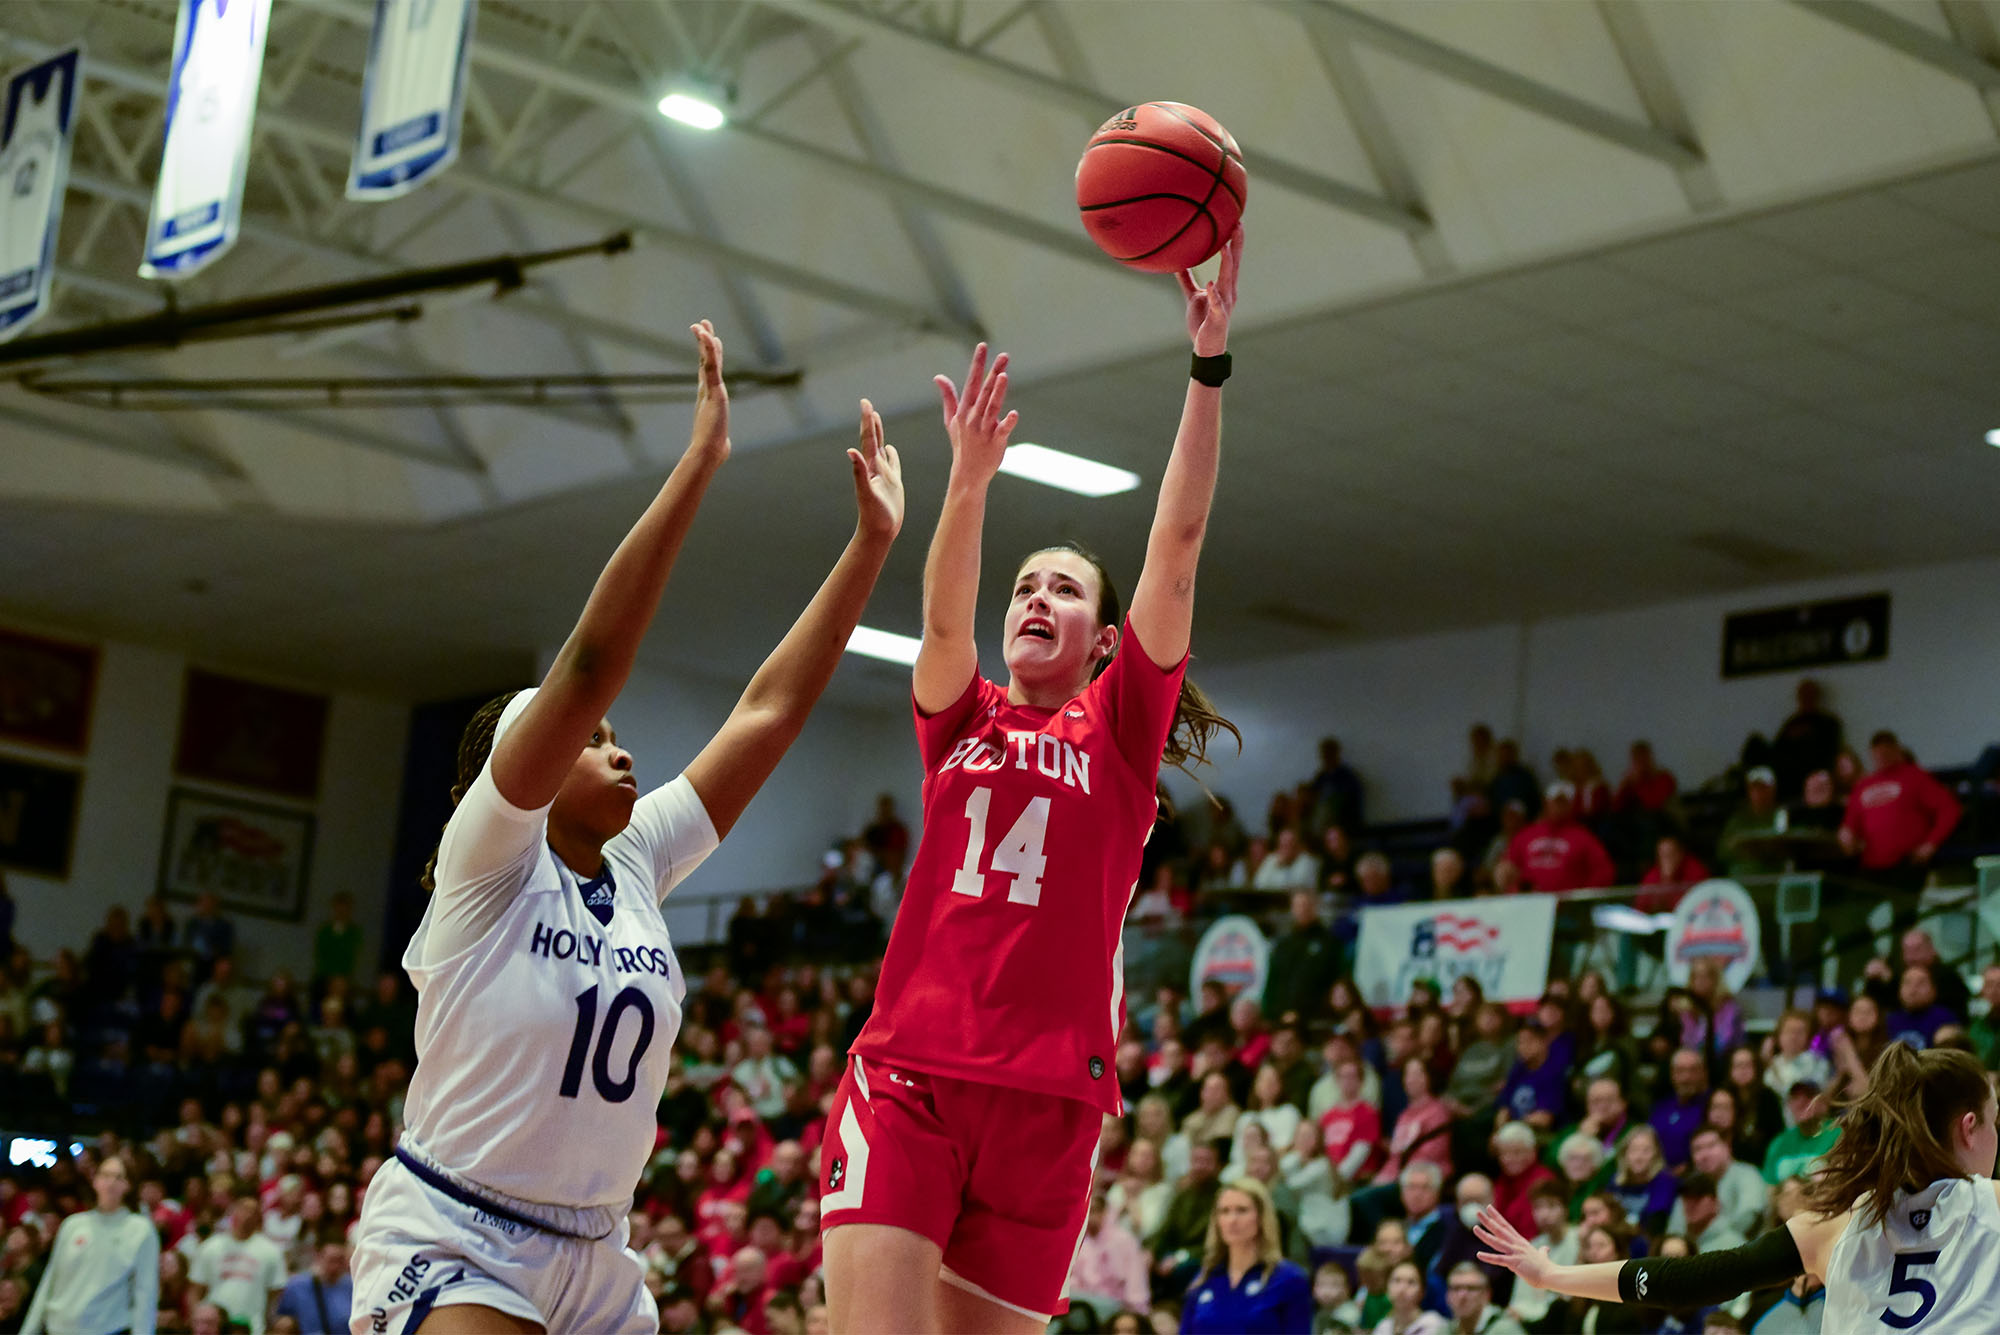 Photo: A Boston University women's basketball player shoots a layup during a recent game in a red jersey with white trim and the number 14. The layup is going over the outstretched arms of a defender in a white jersey with blue trim.